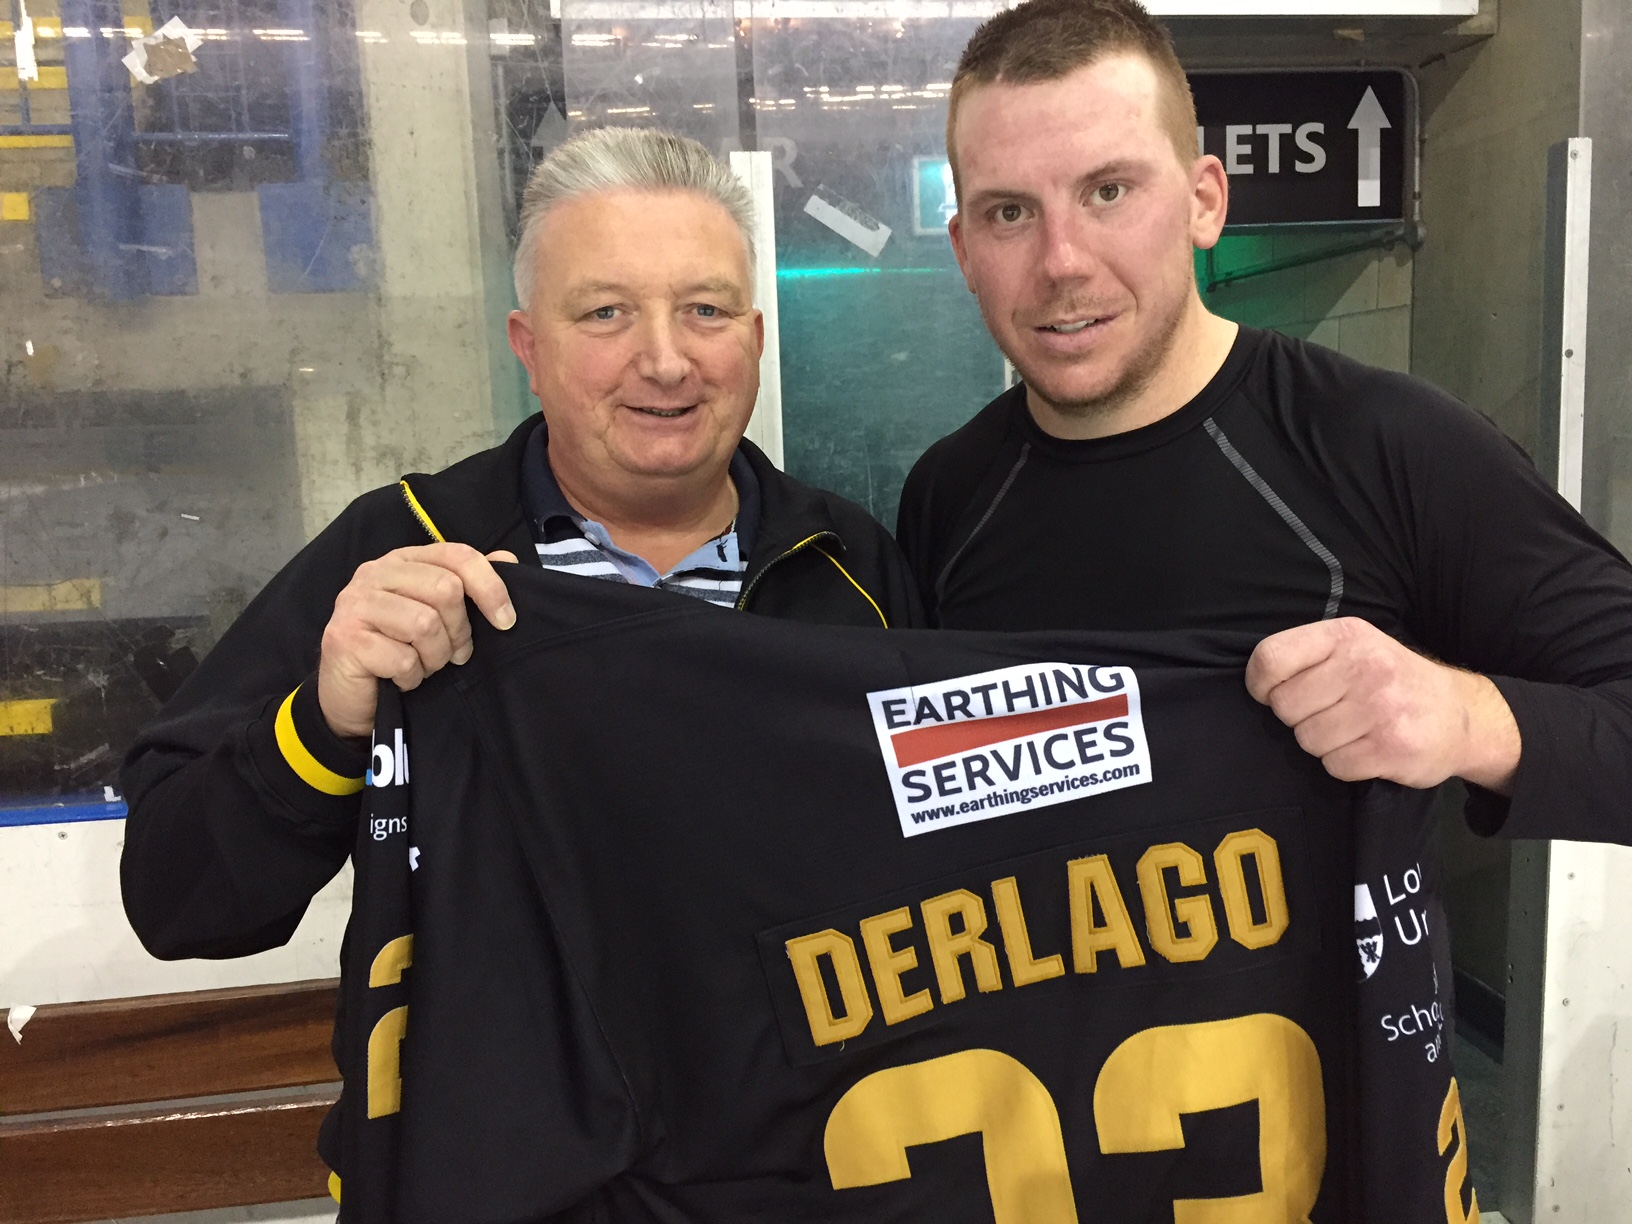 Long time fan leaves with Derlago's jersey Top Image